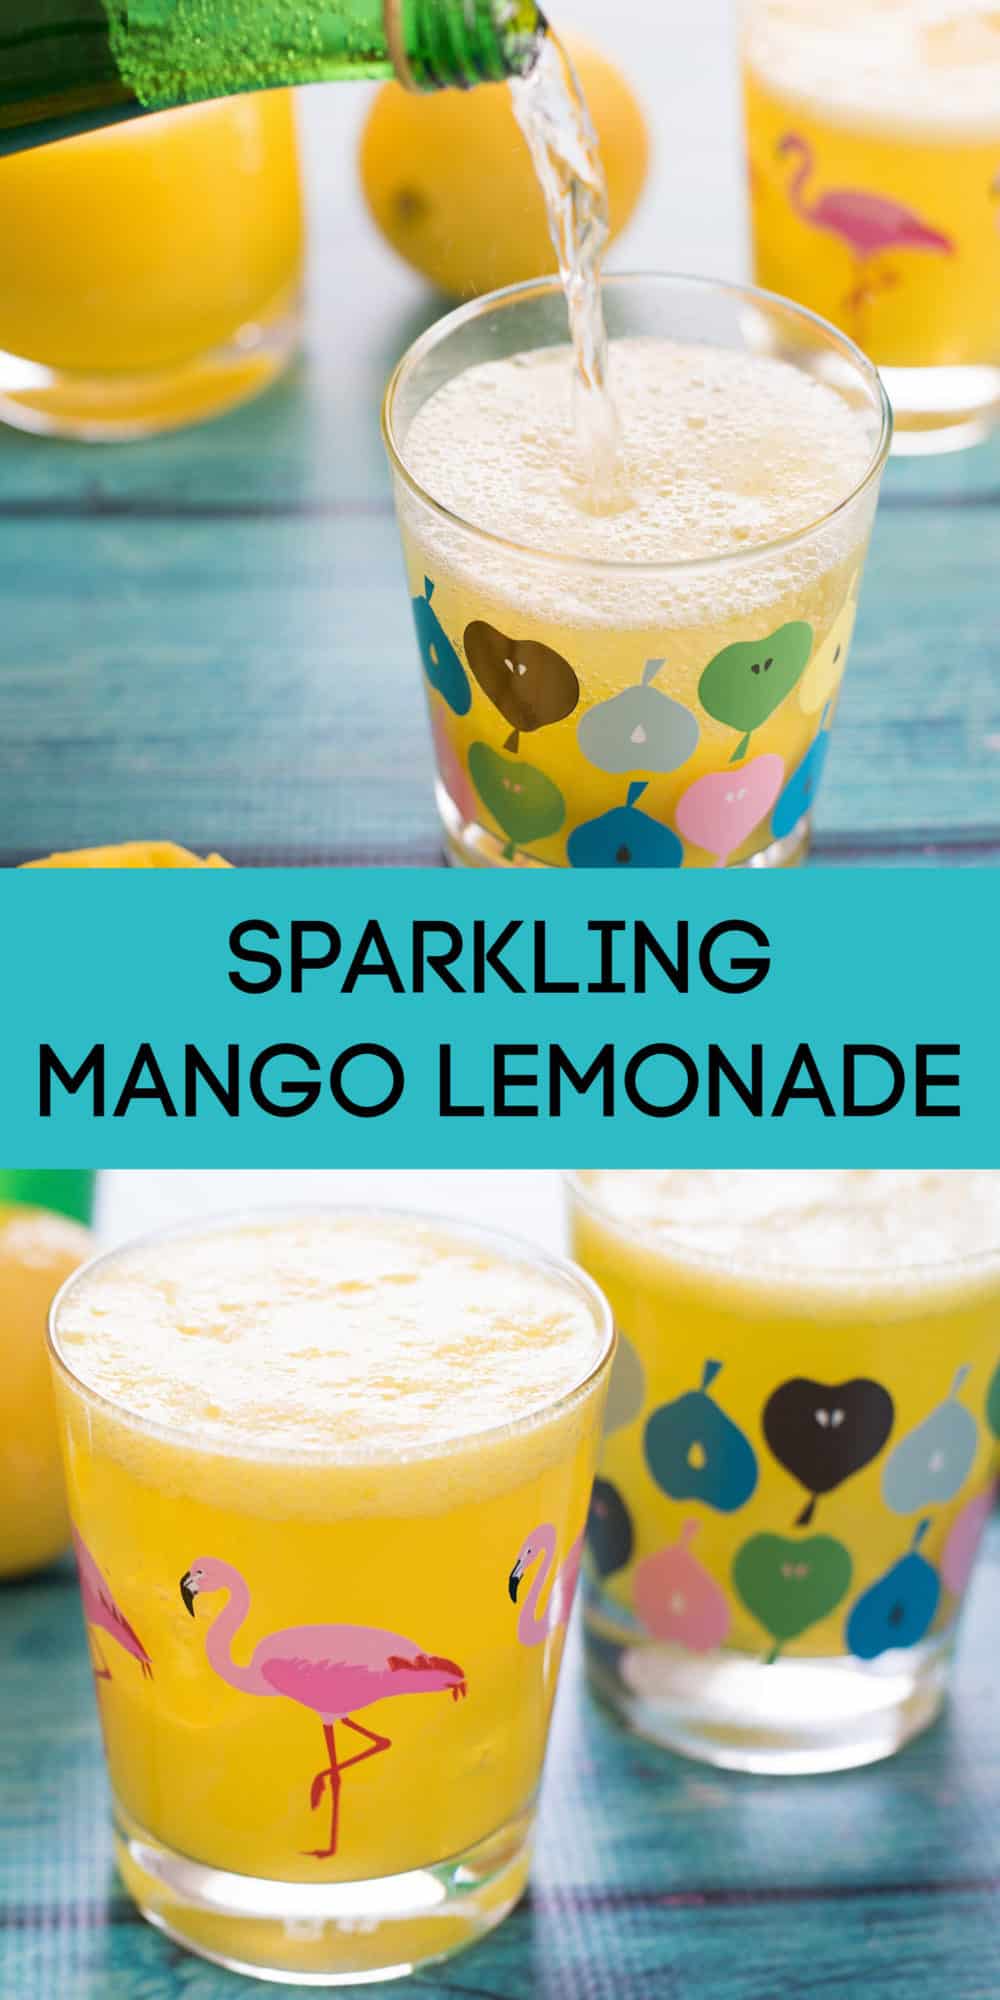 Collage of images of sparkling mango lemonade in printed glasses on teal background. Overlay: SPARKLING MANGO LEMONADE.